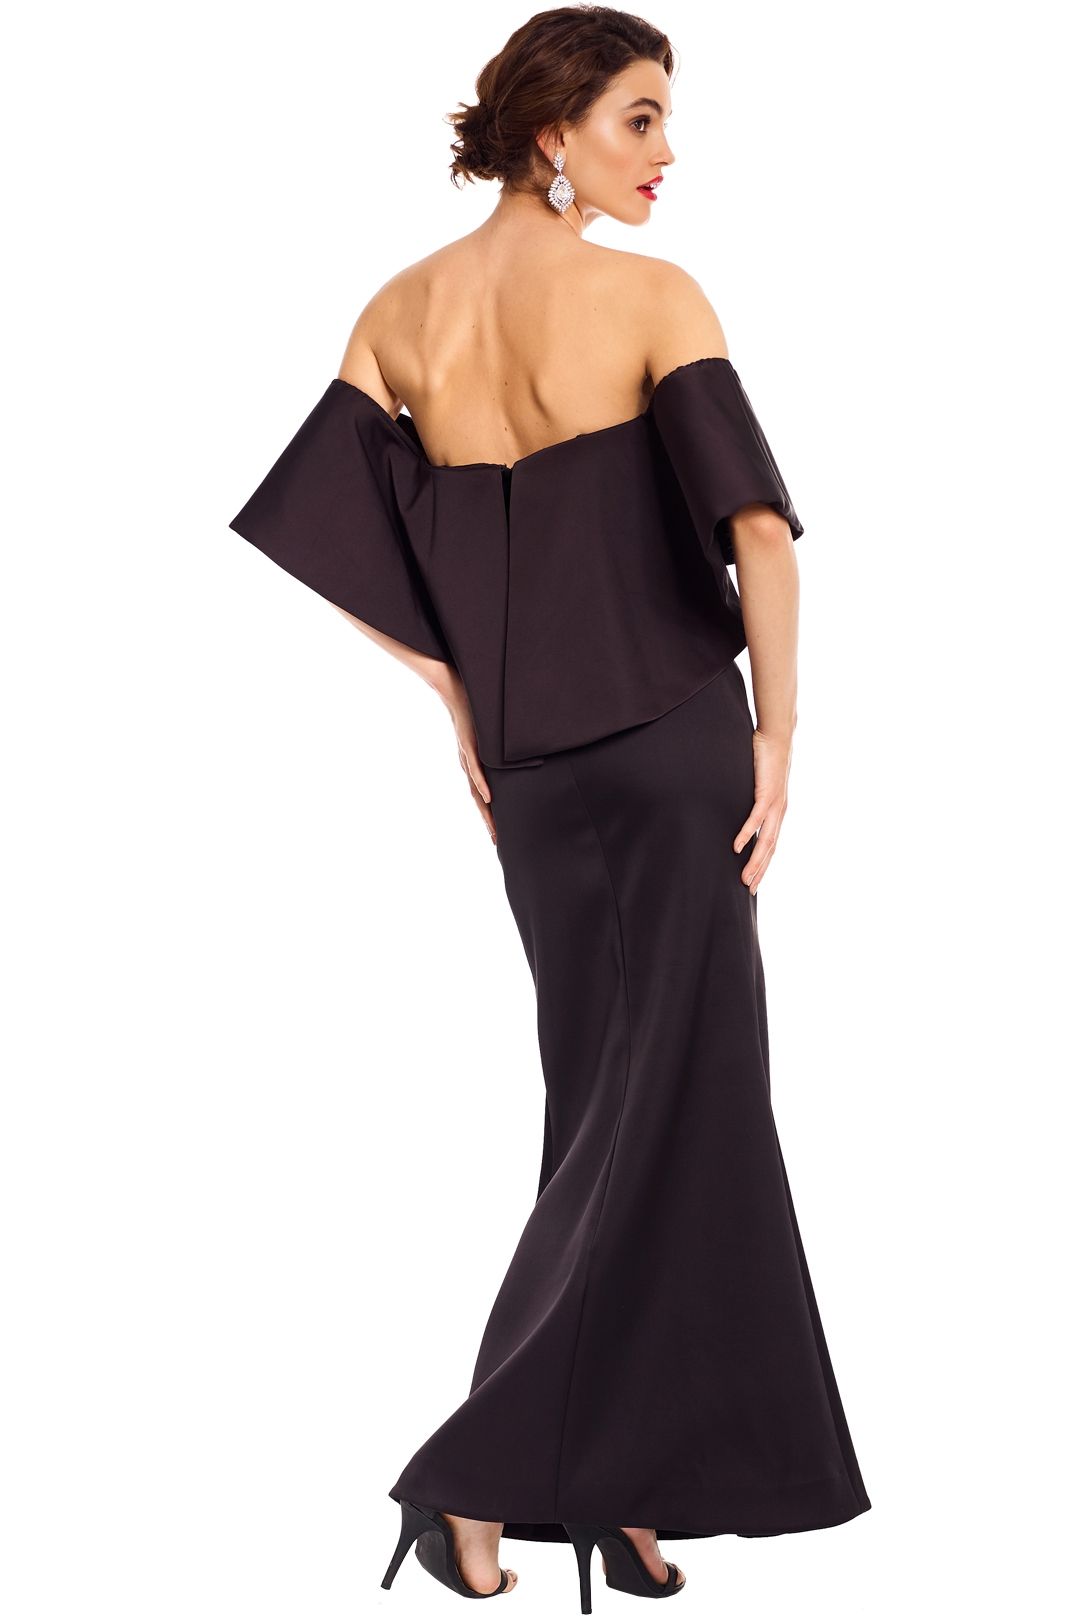 Talulah - Without You Gown - Black - Back